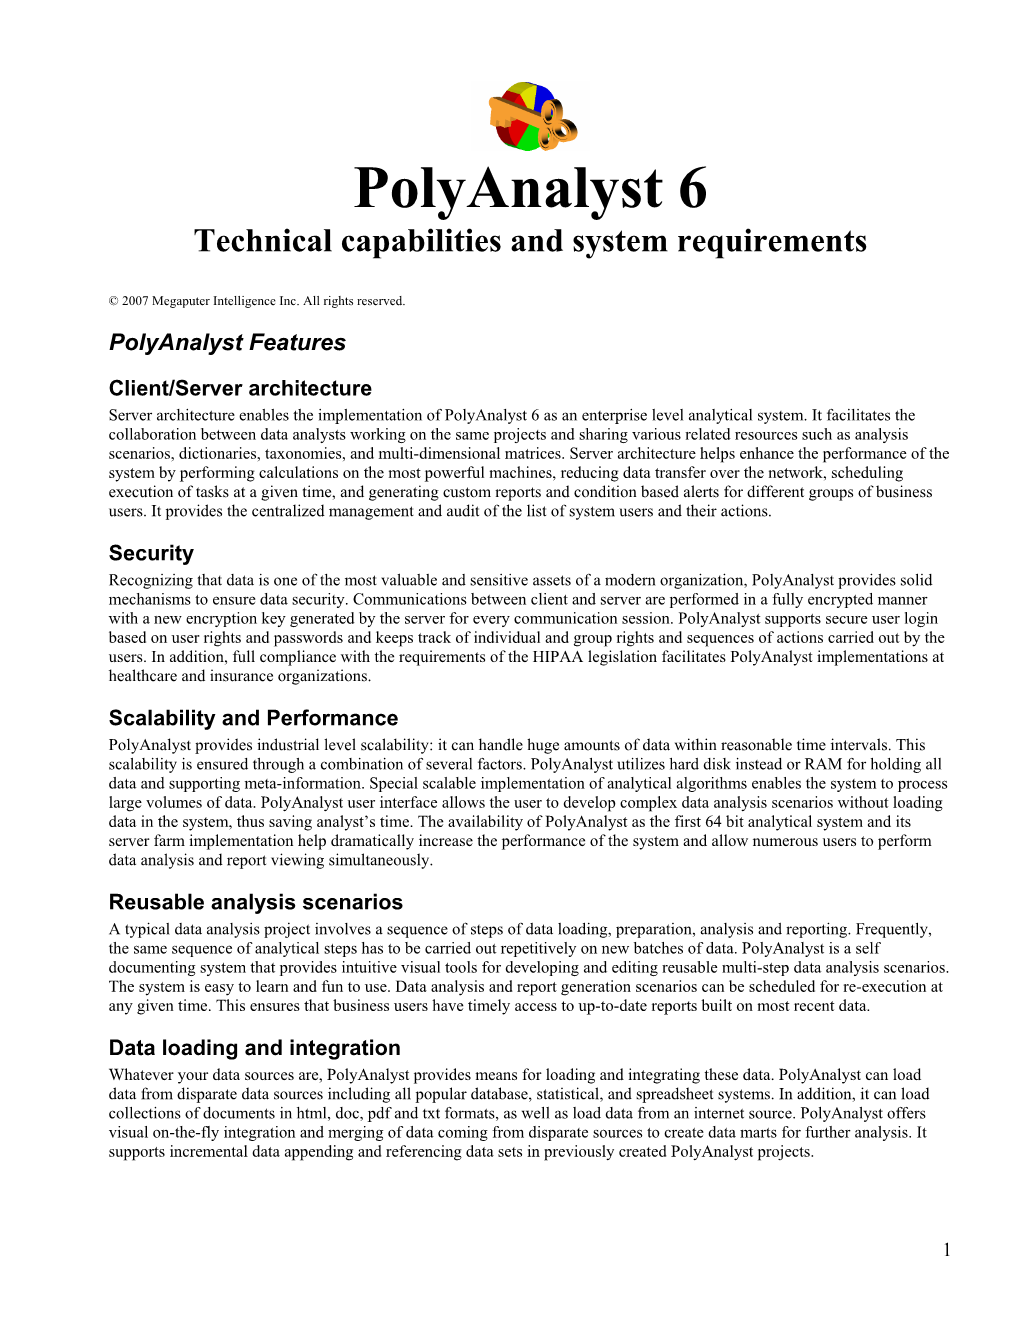 Polyanalyst Technical Capabilities and System Requirements